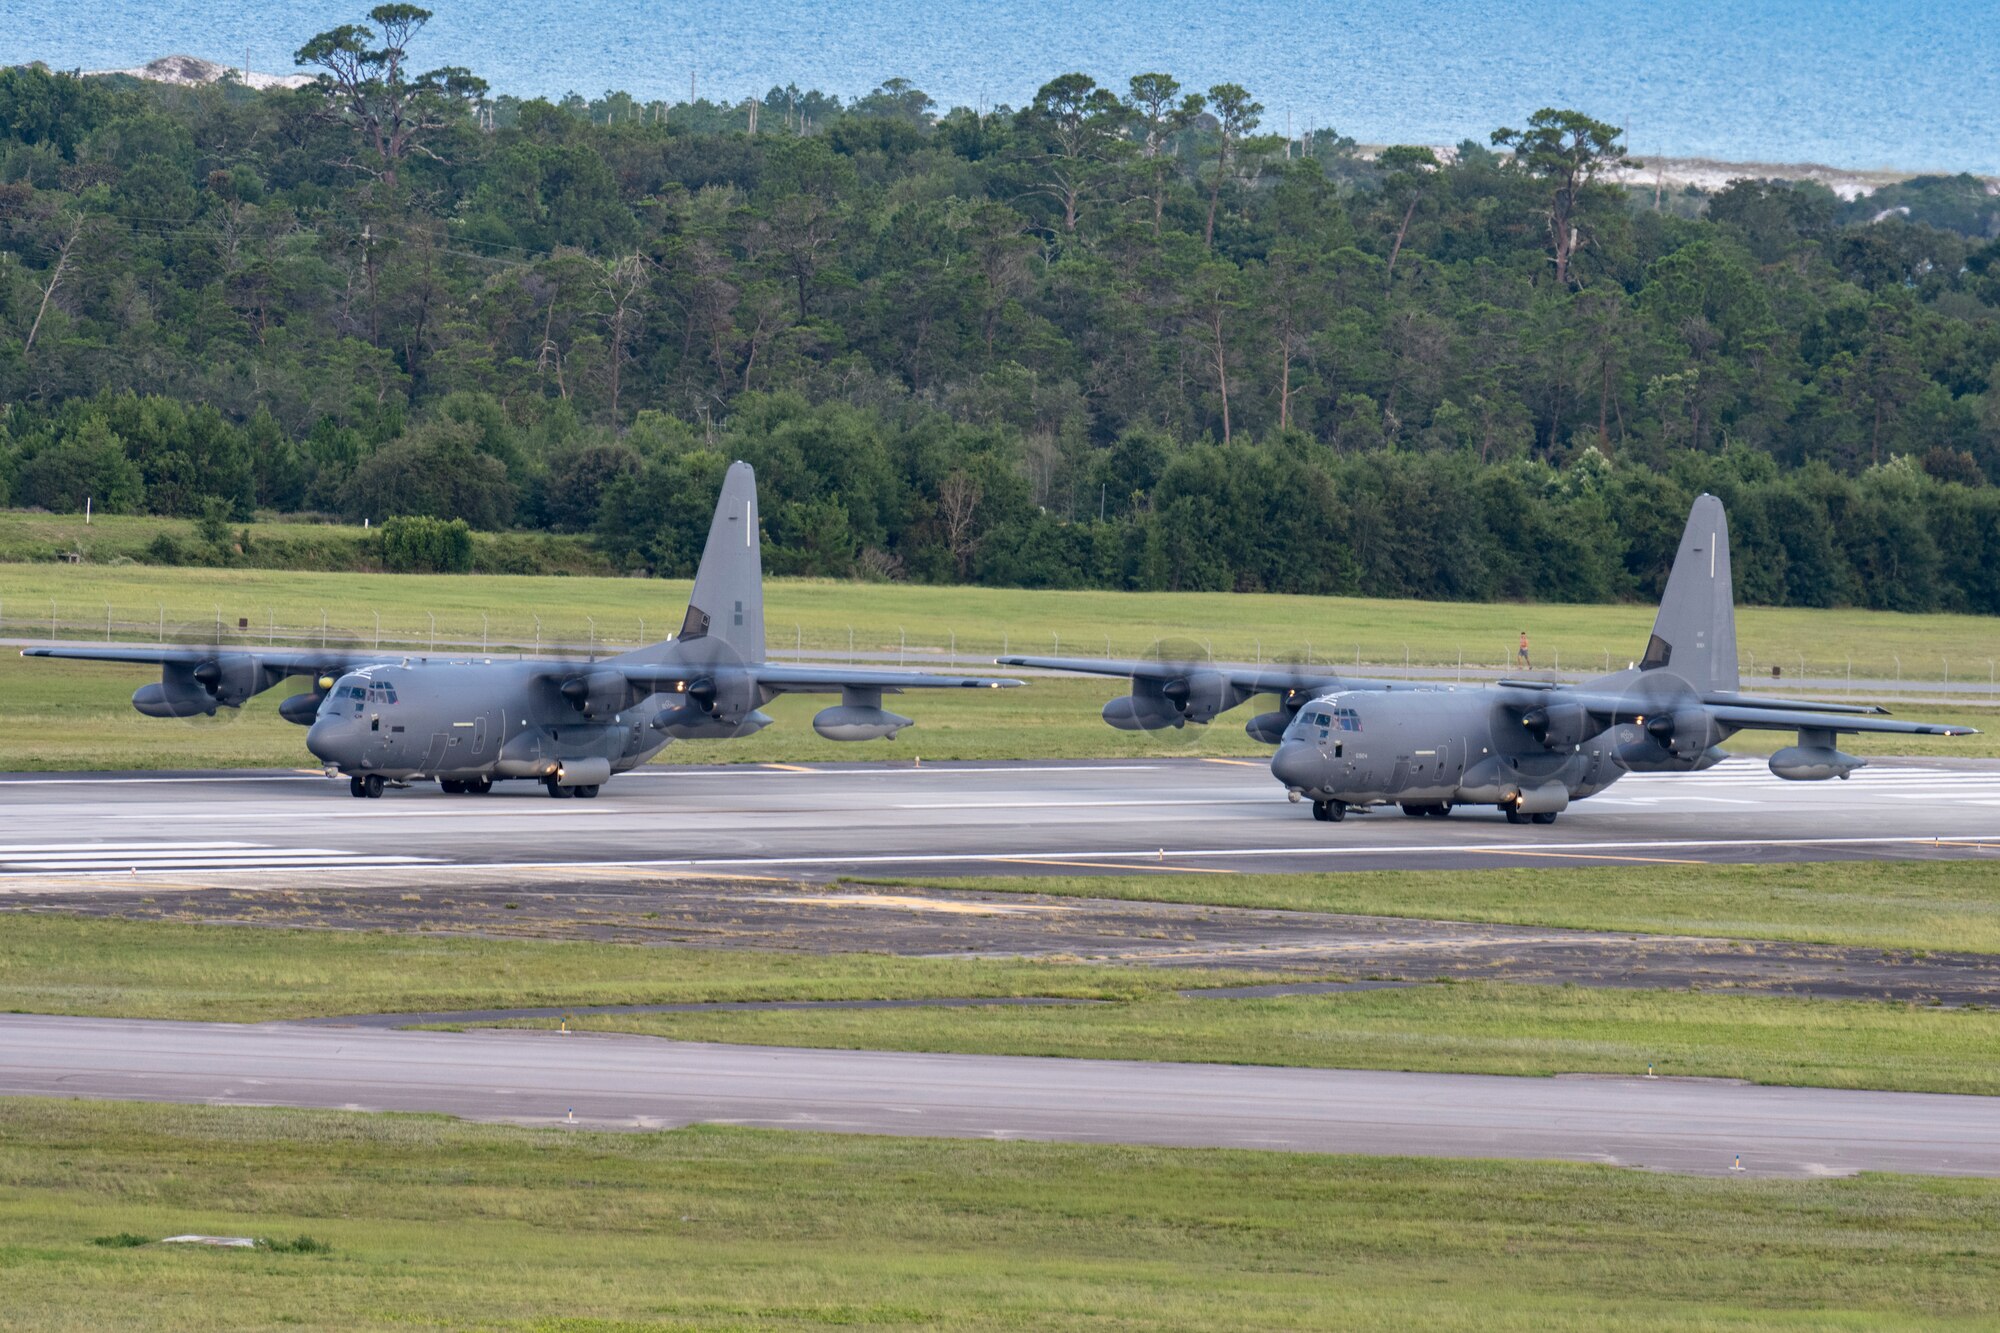 Two MC-130J Commando II aircraft from the 1st Special Operations Wing taxi to the runway at Hurlburt Field, Florida, Jul. 6, 2023. The 1st Special Operation Wing, especially postured for rapid intervention in any crisis or conflict, launched two MC-130Js in support of U.S. Southern Command to enhance collective readiness, capability and contribute to regional security in the Western Hemisphere